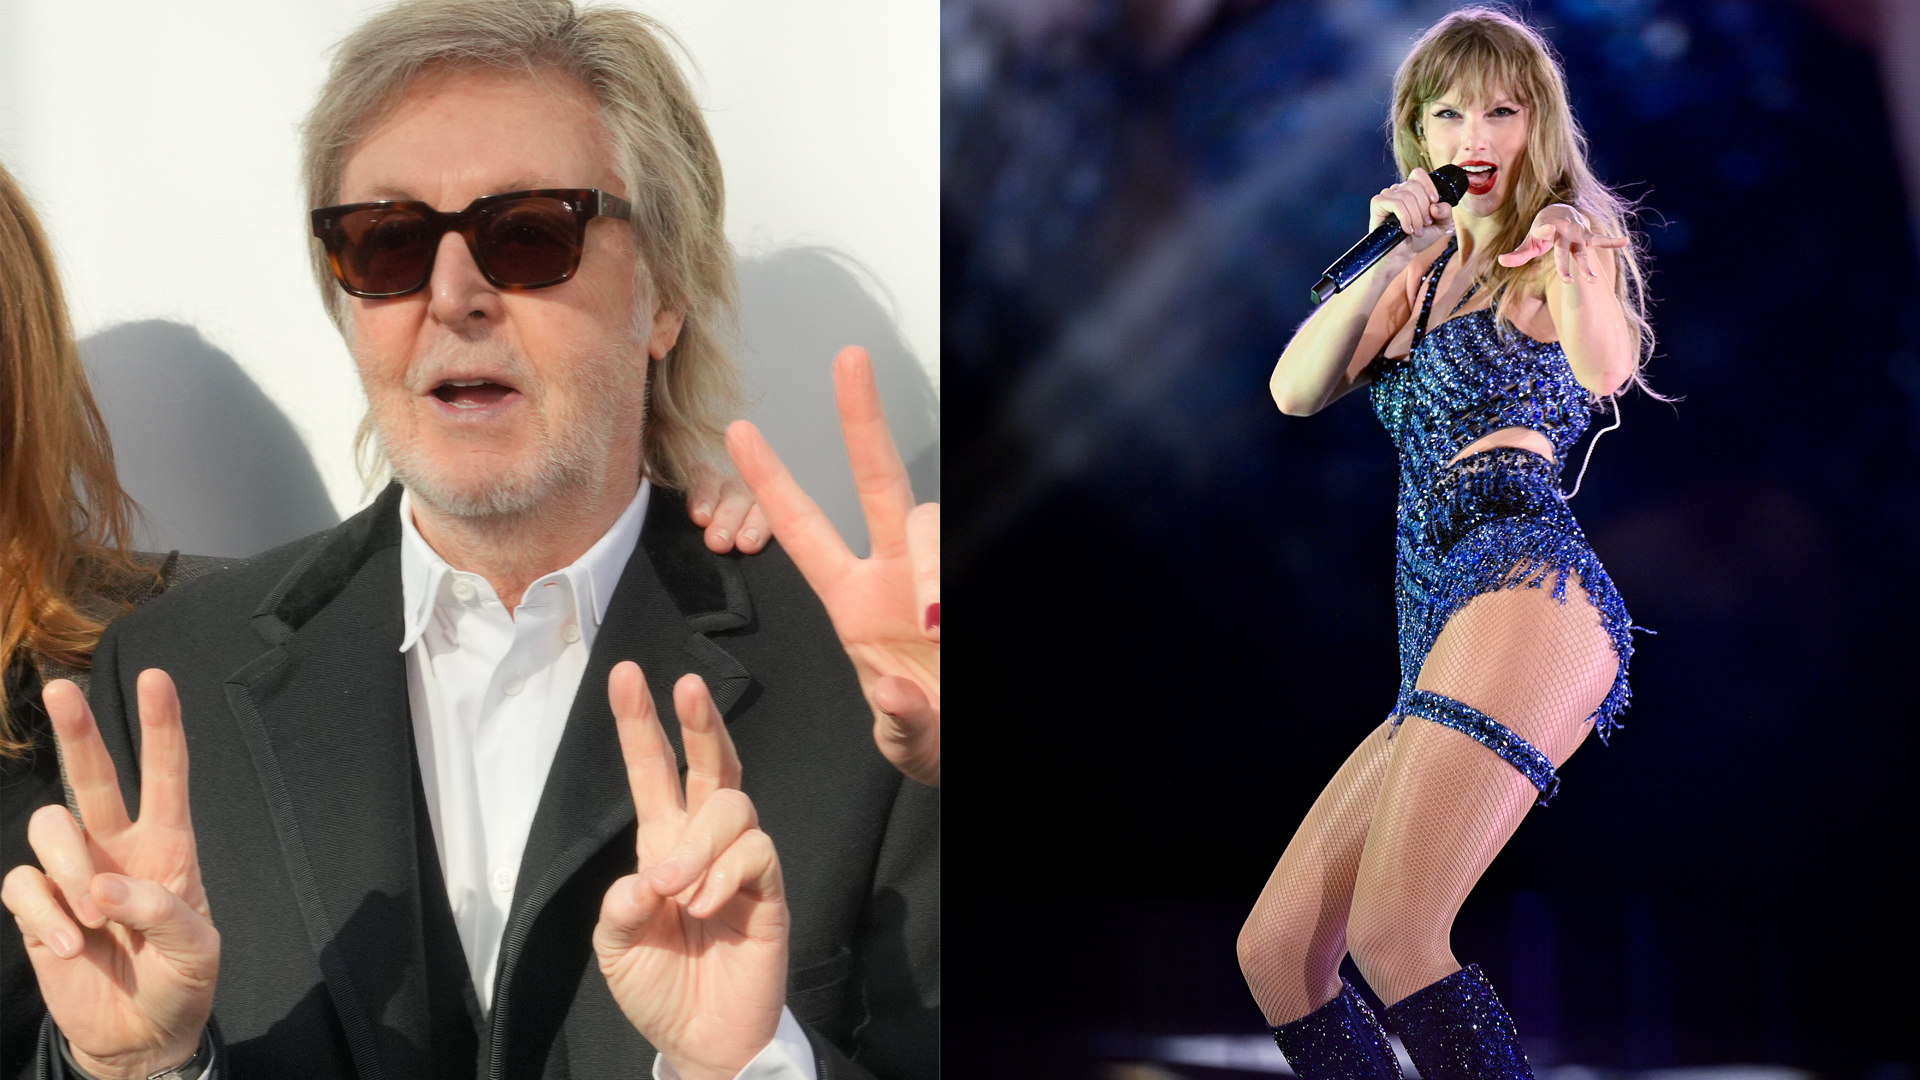 “Protect Paul McCartney at all costs”: Macca spotted at Taylor Swift concert dancing with fans and handing out friendship bracelets